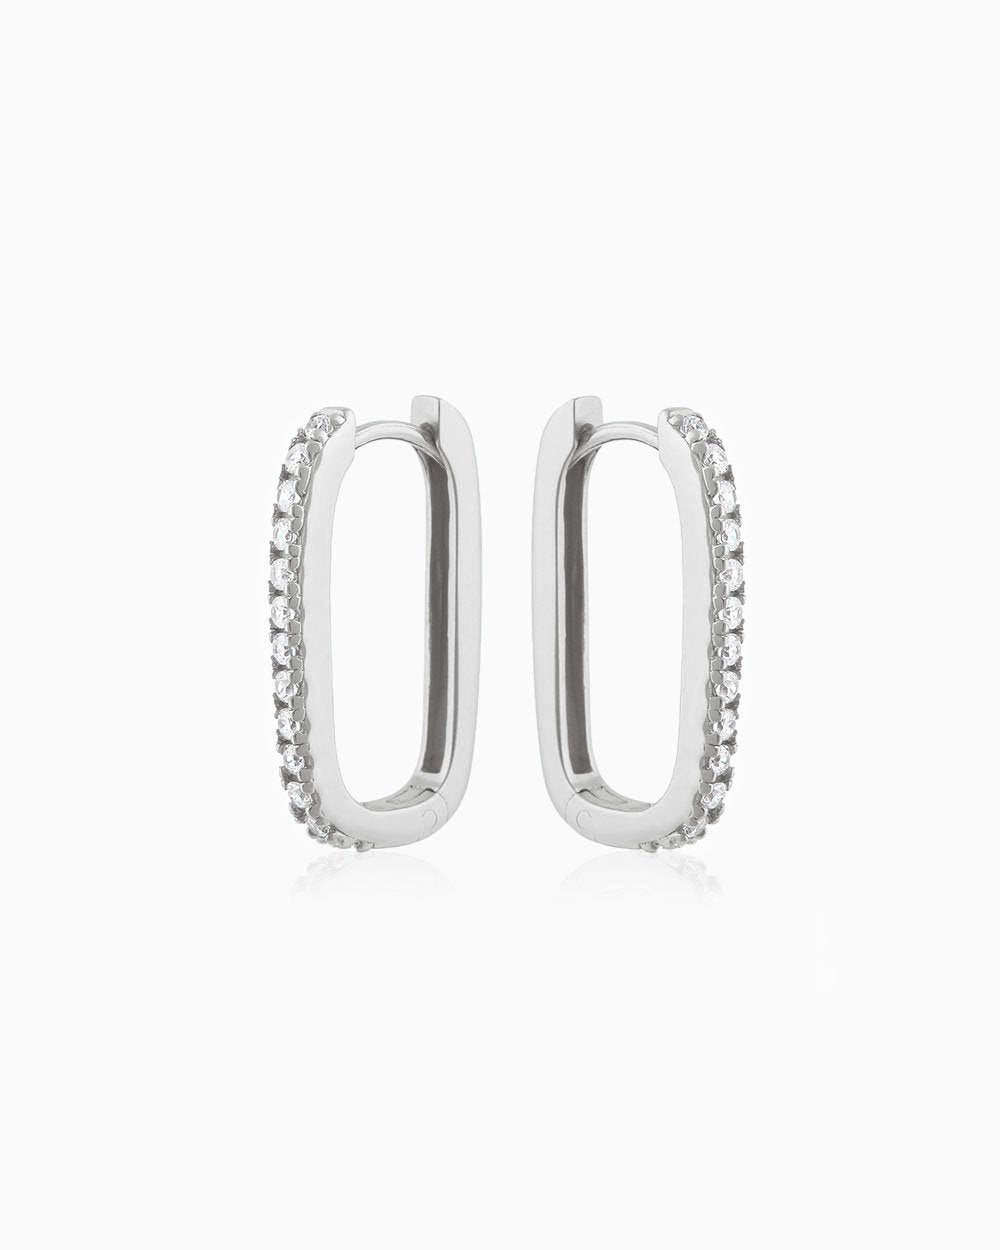 Lucy Silver Hoops